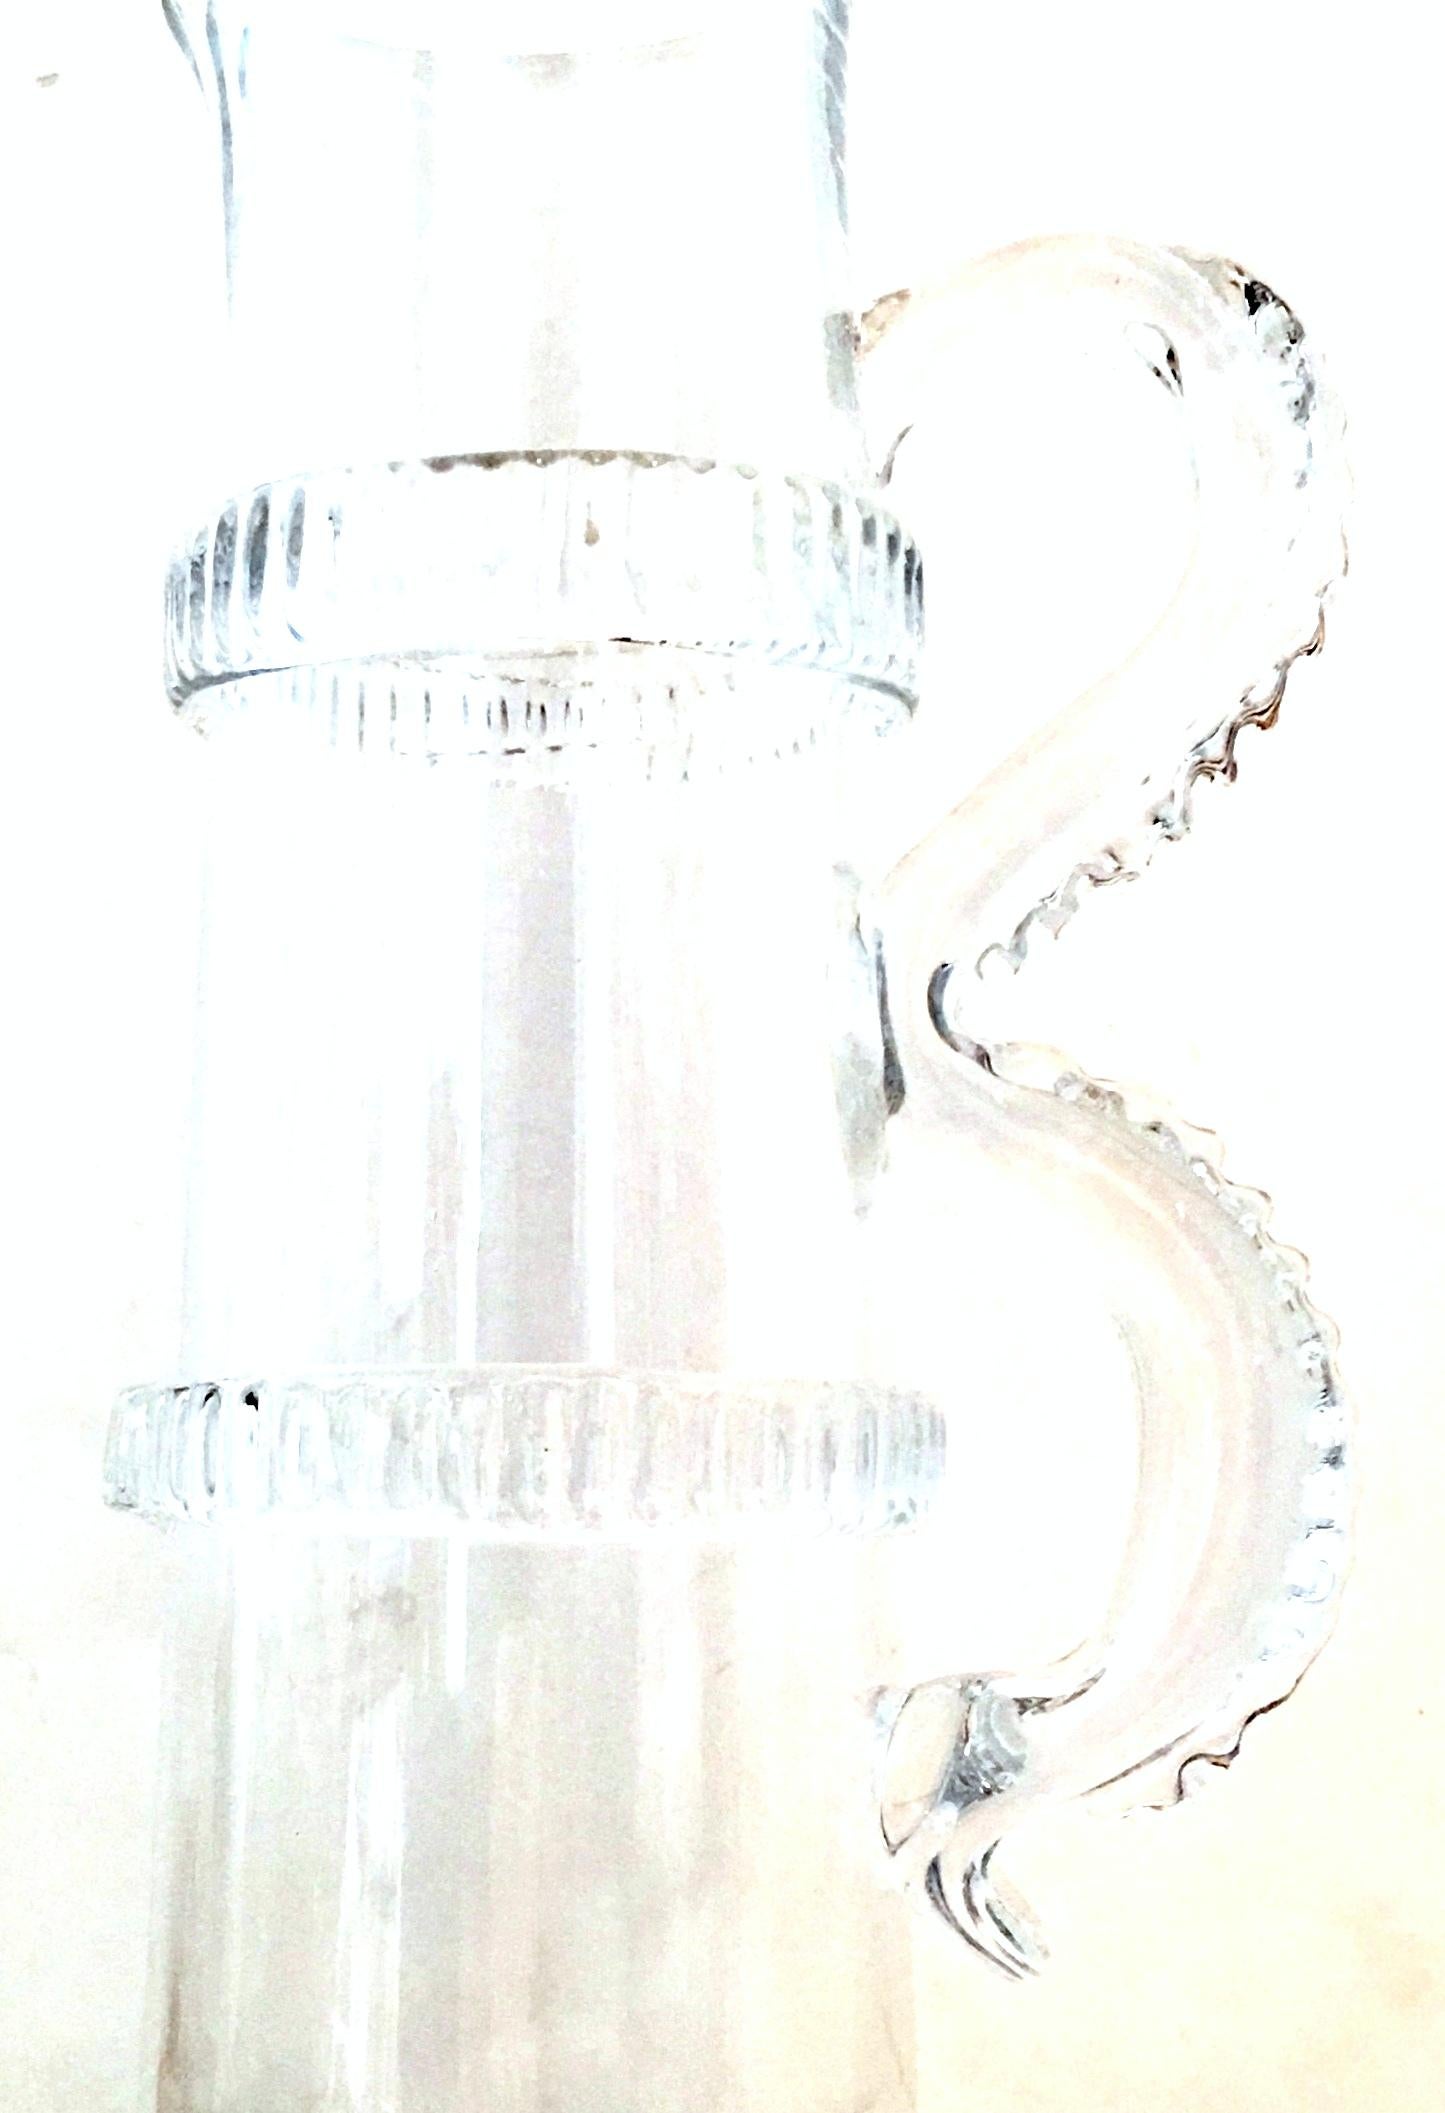 21st century contemporary and new cut to clear crystal faux bamboo motif with applied handle beverage pitcher.